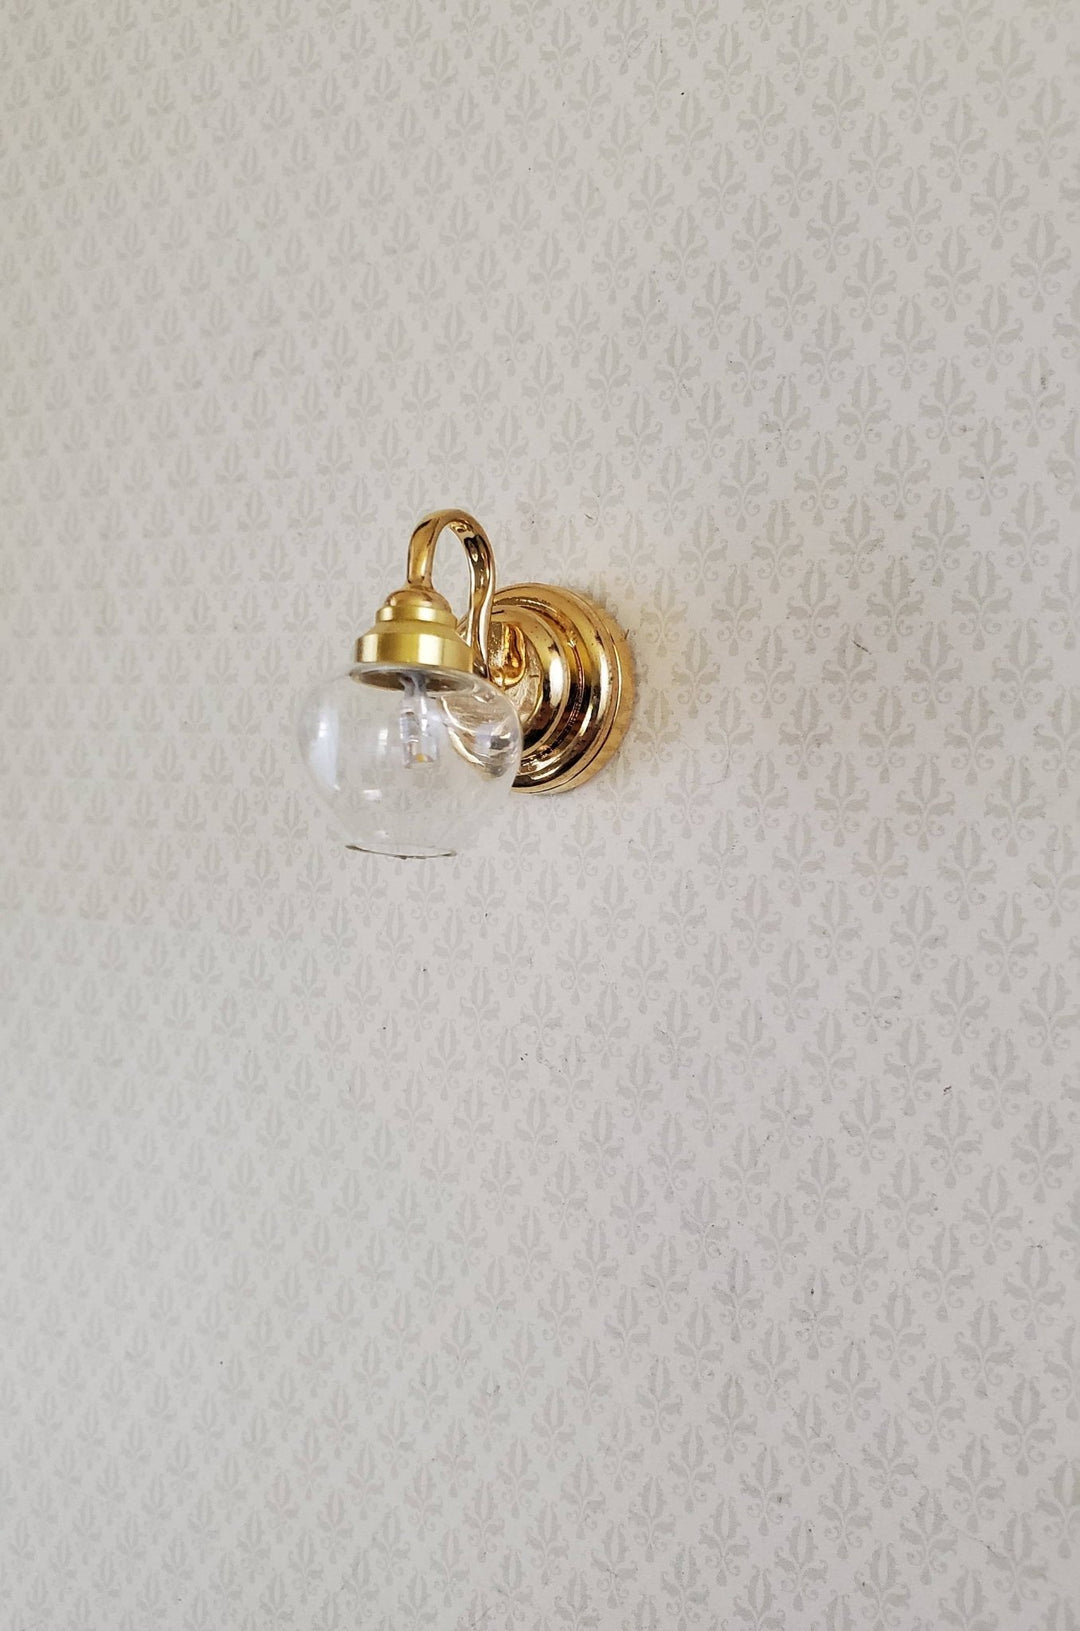 Dollhouse Battery Light LARGE Wall Sconce Clear Shade 1:12 Scale Miniature - Miniature Crush